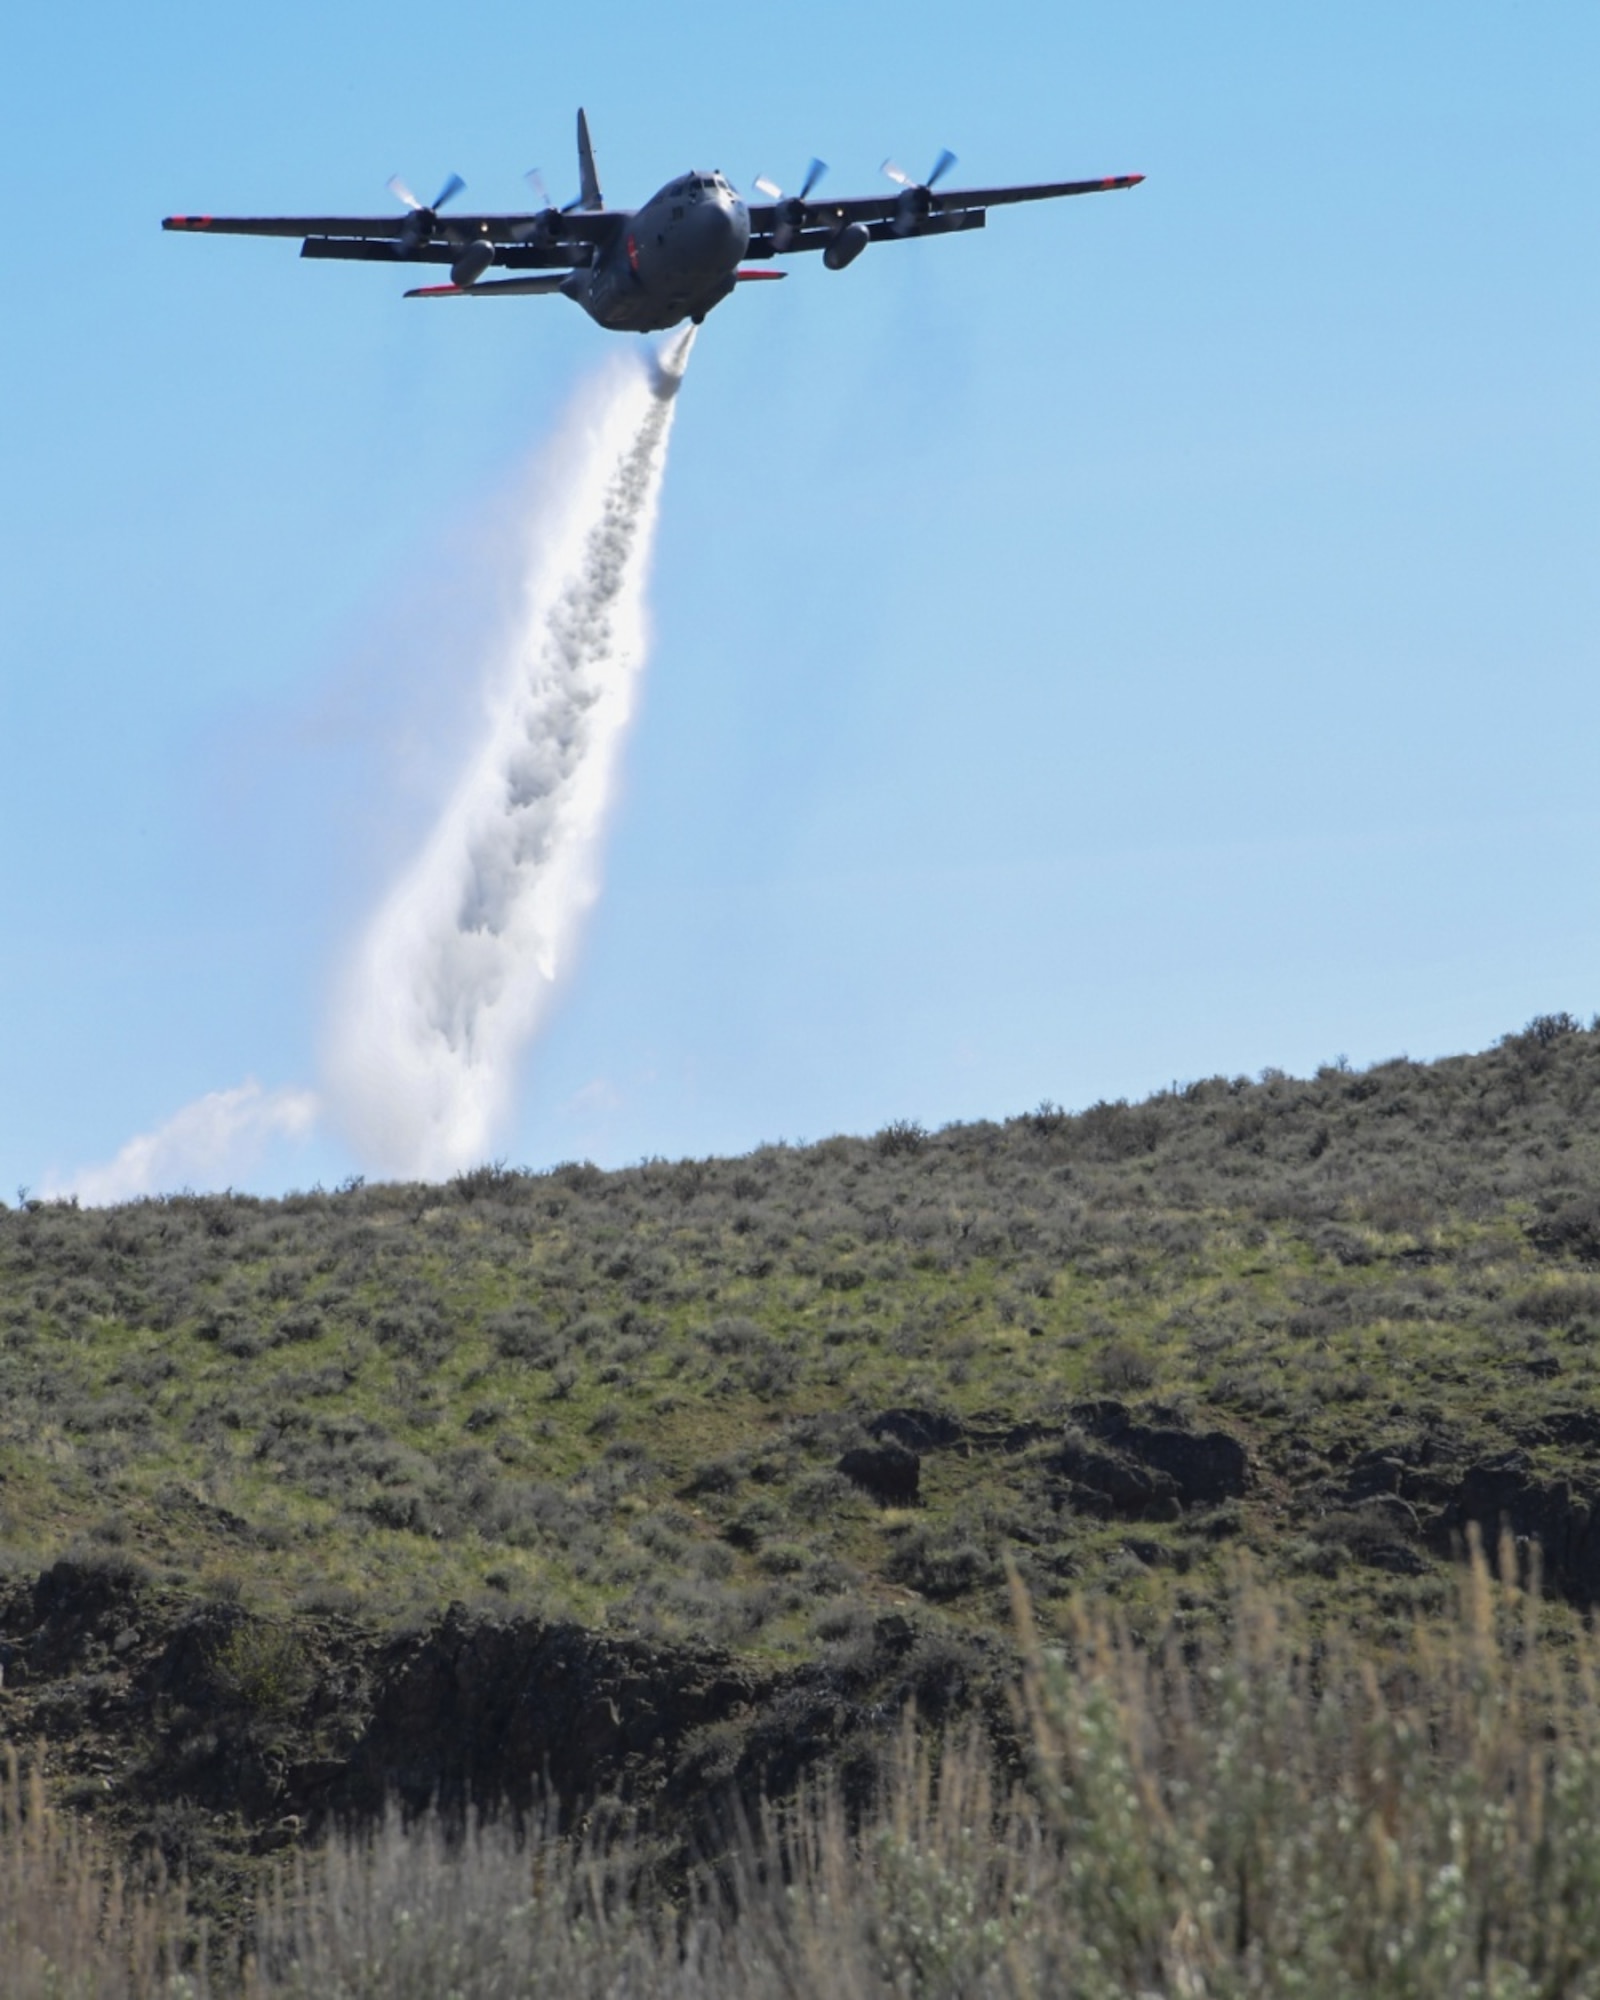 A C-130 Hercules loaded with the MAFFS (Modular Airborne Fire Fighting System) from the 152nd Airlift Wing of Reno, Nevada drops a water line while training to contain wildfires outside Boise, Idaho. April 21, 2017. More than 400 personnel of four C-130 Guard and Reserve units — from California, Colorado, Nevada and Wyoming, making up the Air Expeditionary Group — are in Boise, Idaho for the week-long wildfire training and certification sponsored by the U.S. (U.S. Air National Guard photo by Staff Sgt. Nieko Carzis)